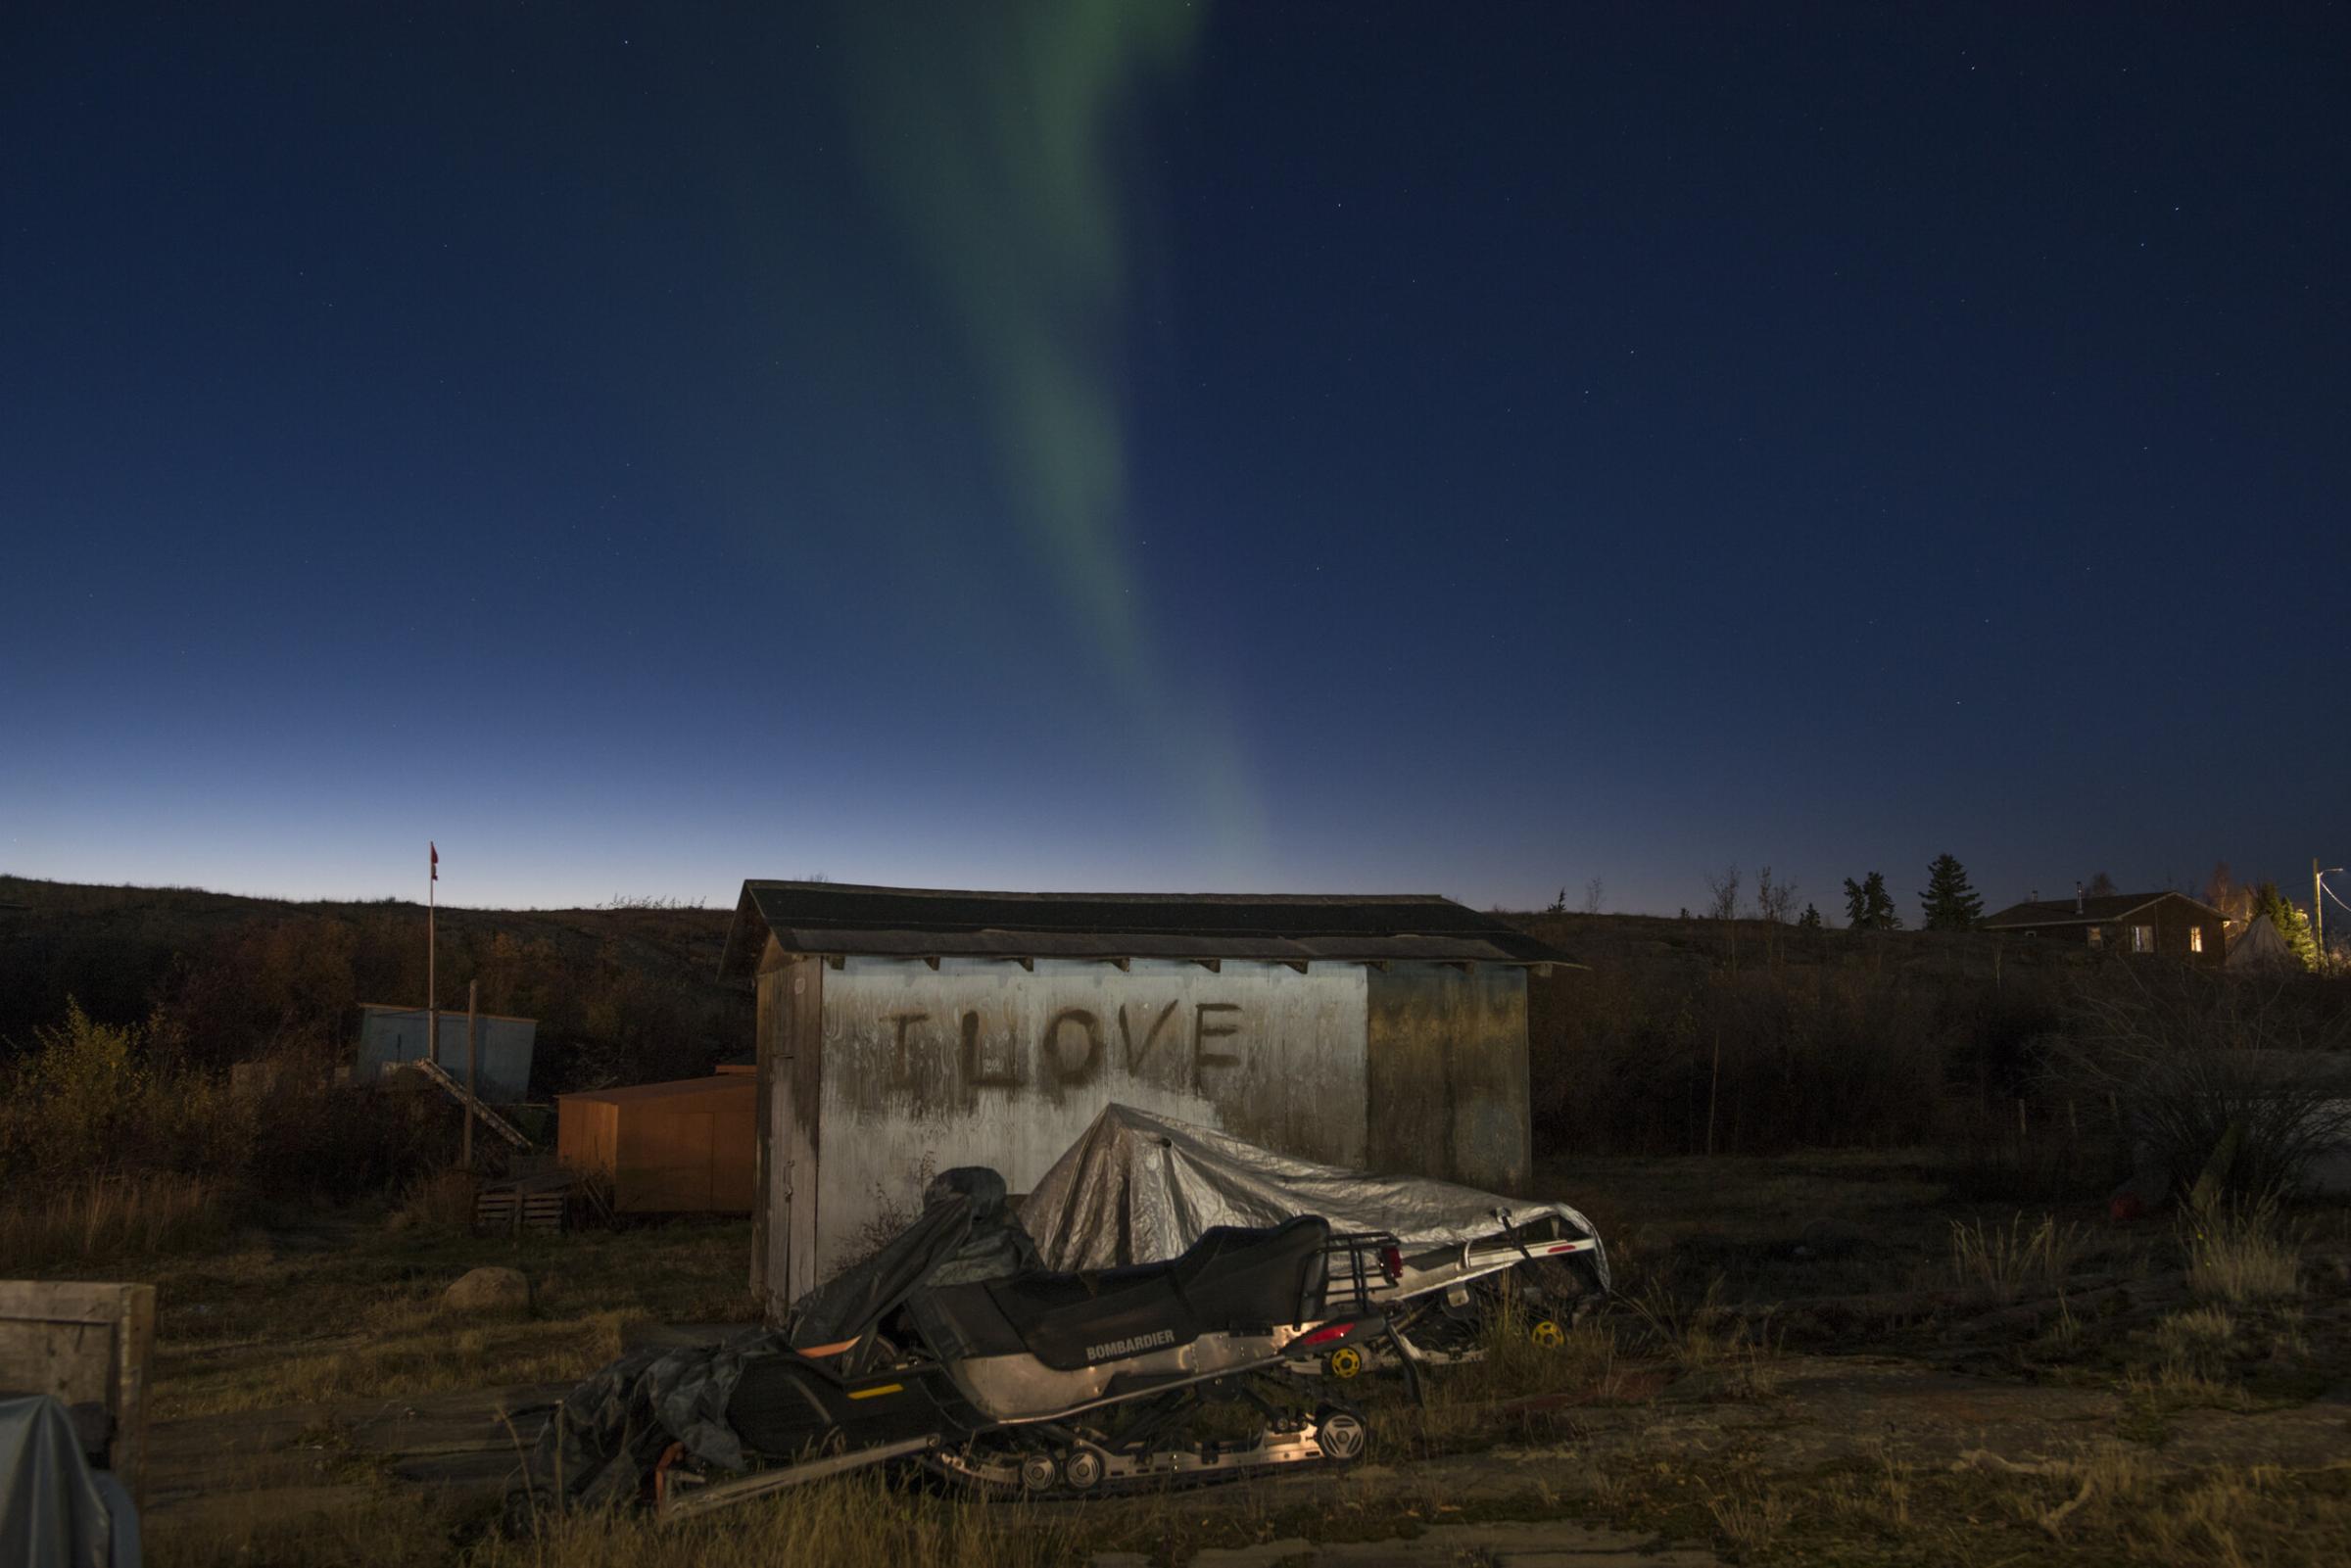 Here Is Where We Shall Stay - The aurora borealis appears over the village of Dettah.